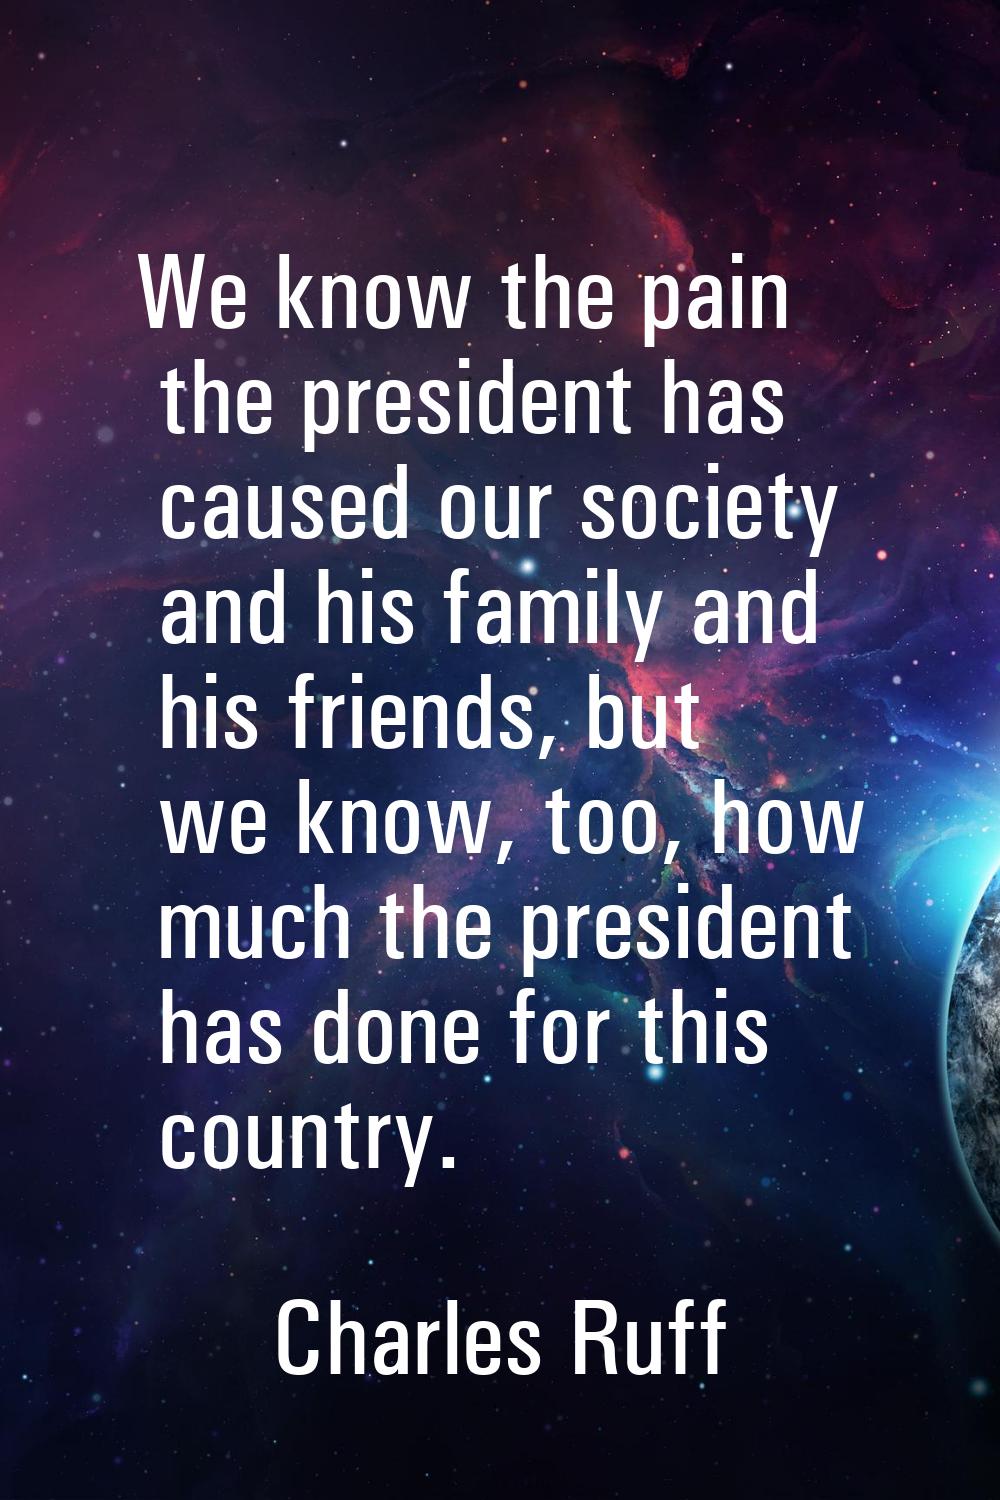 We know the pain the president has caused our society and his family and his friends, but we know, 